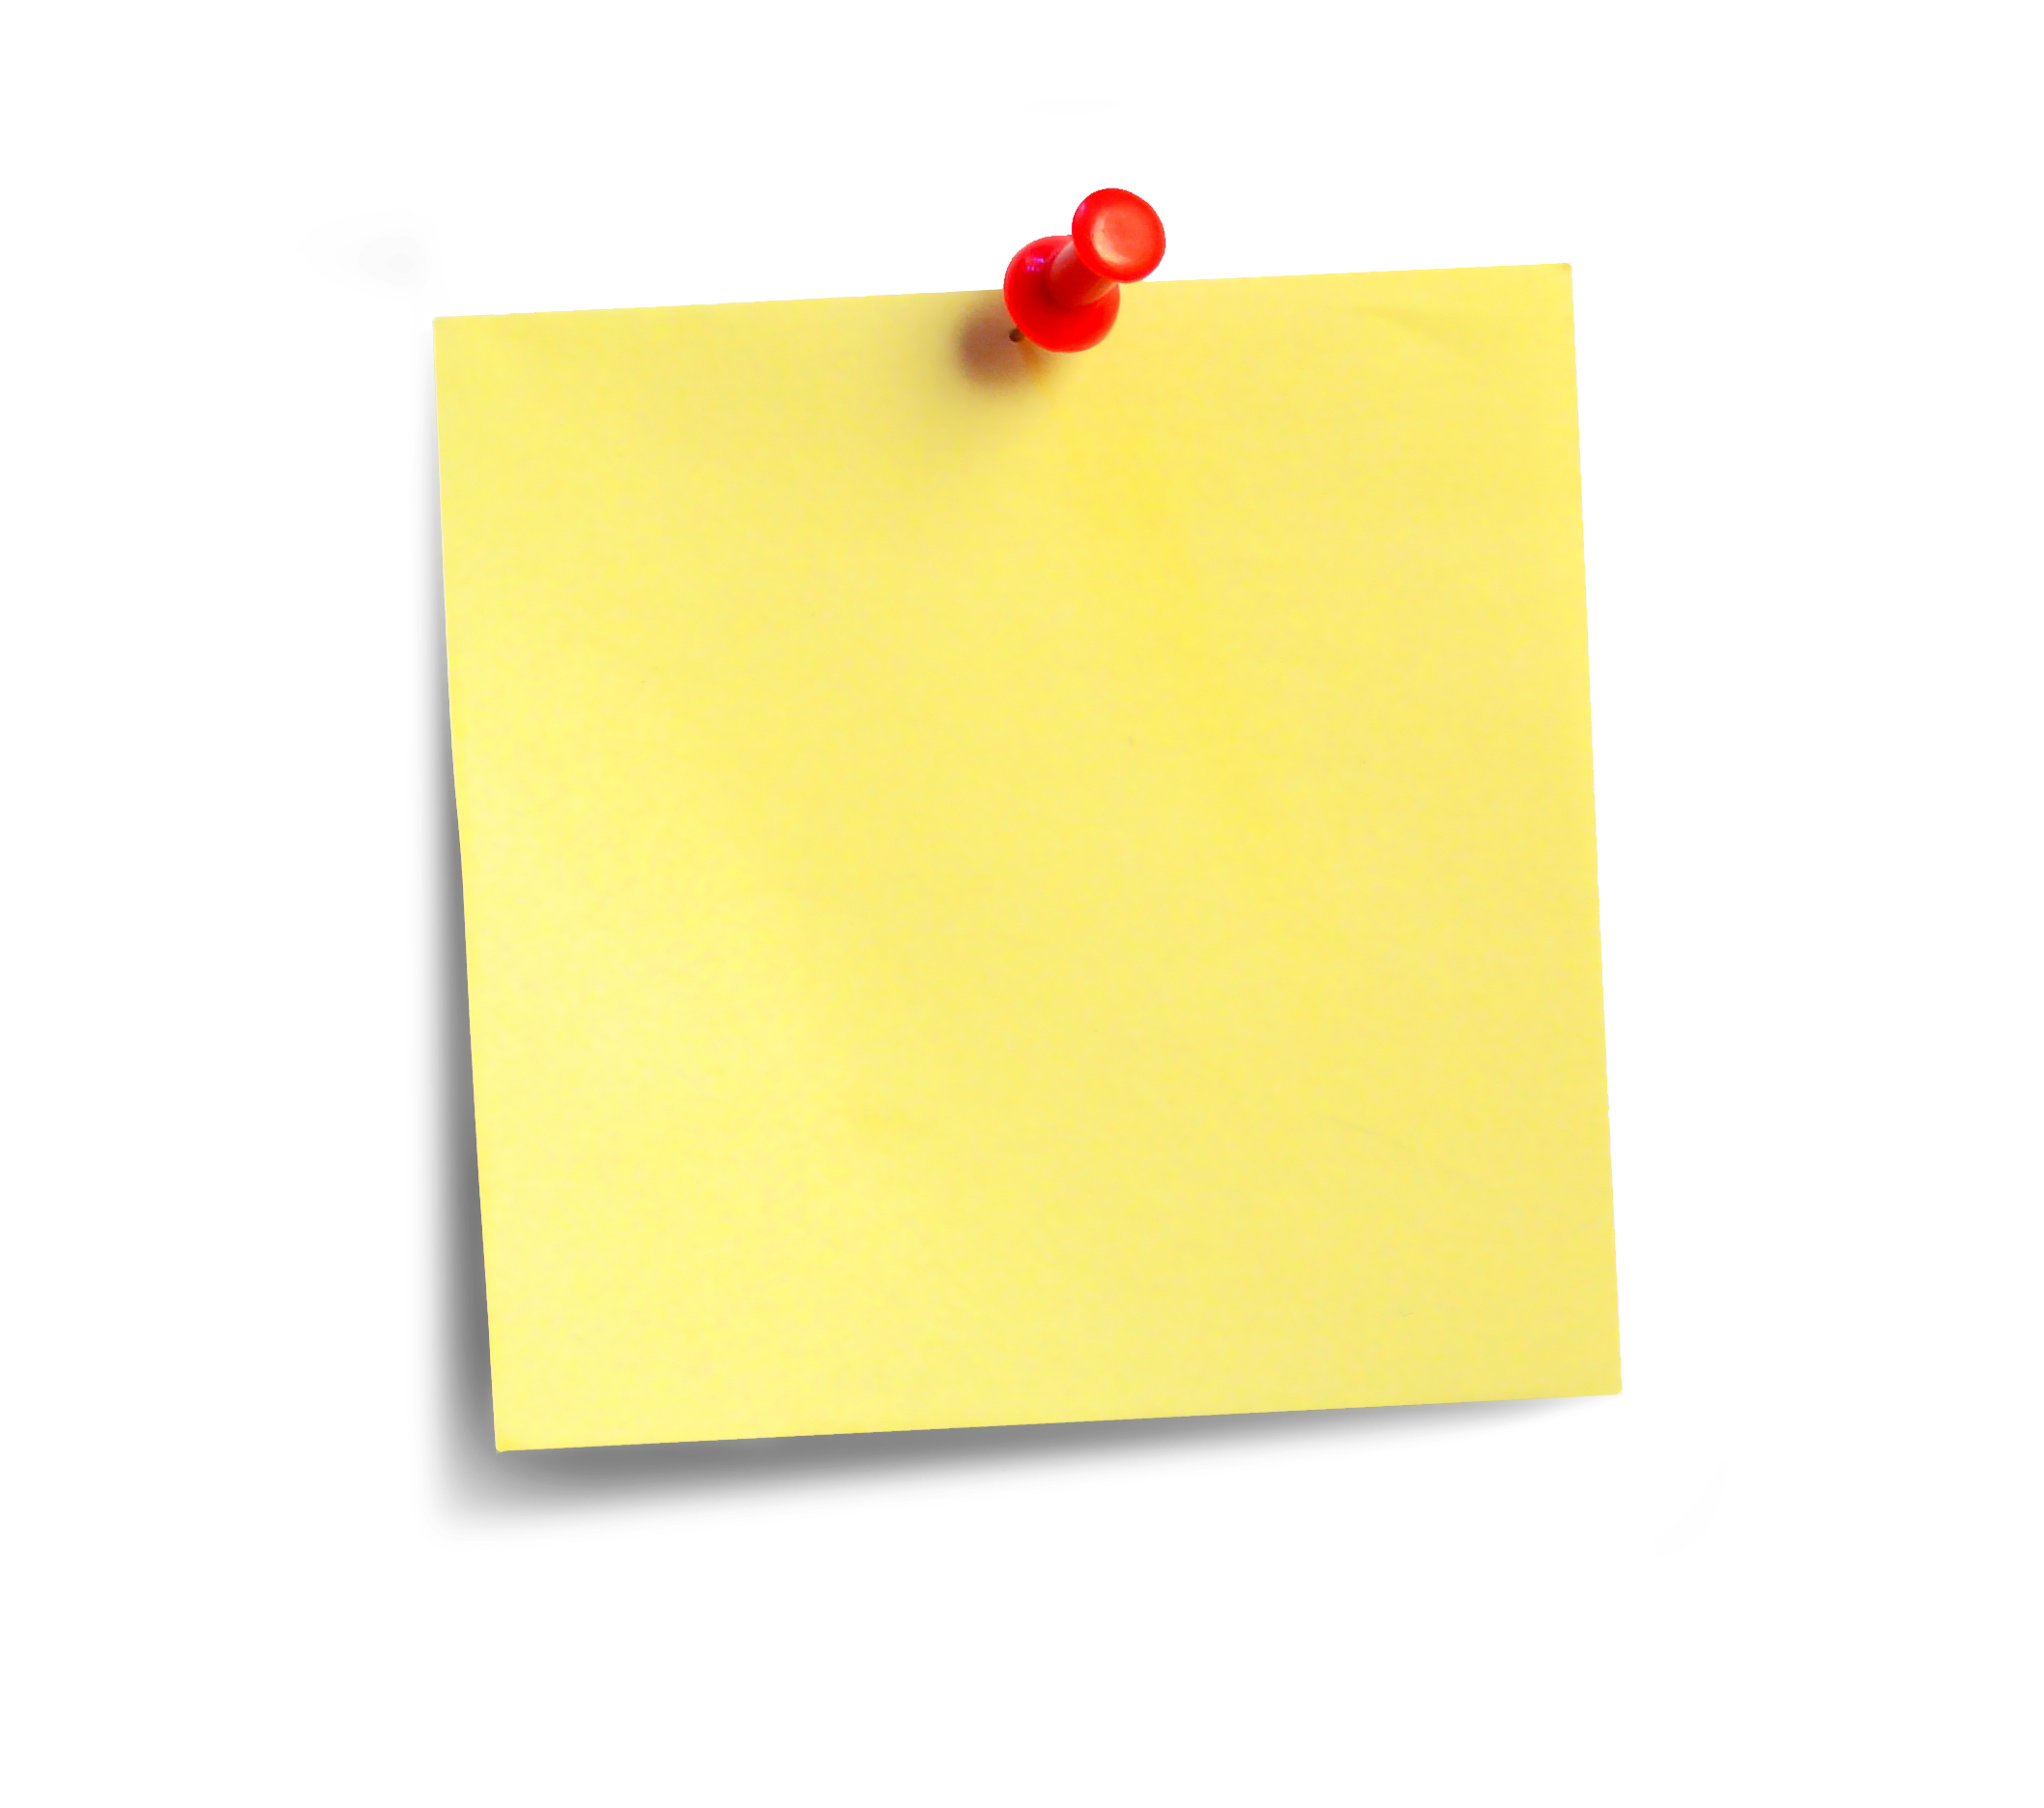 What? A Post-it Speaker? | Innovation Lab